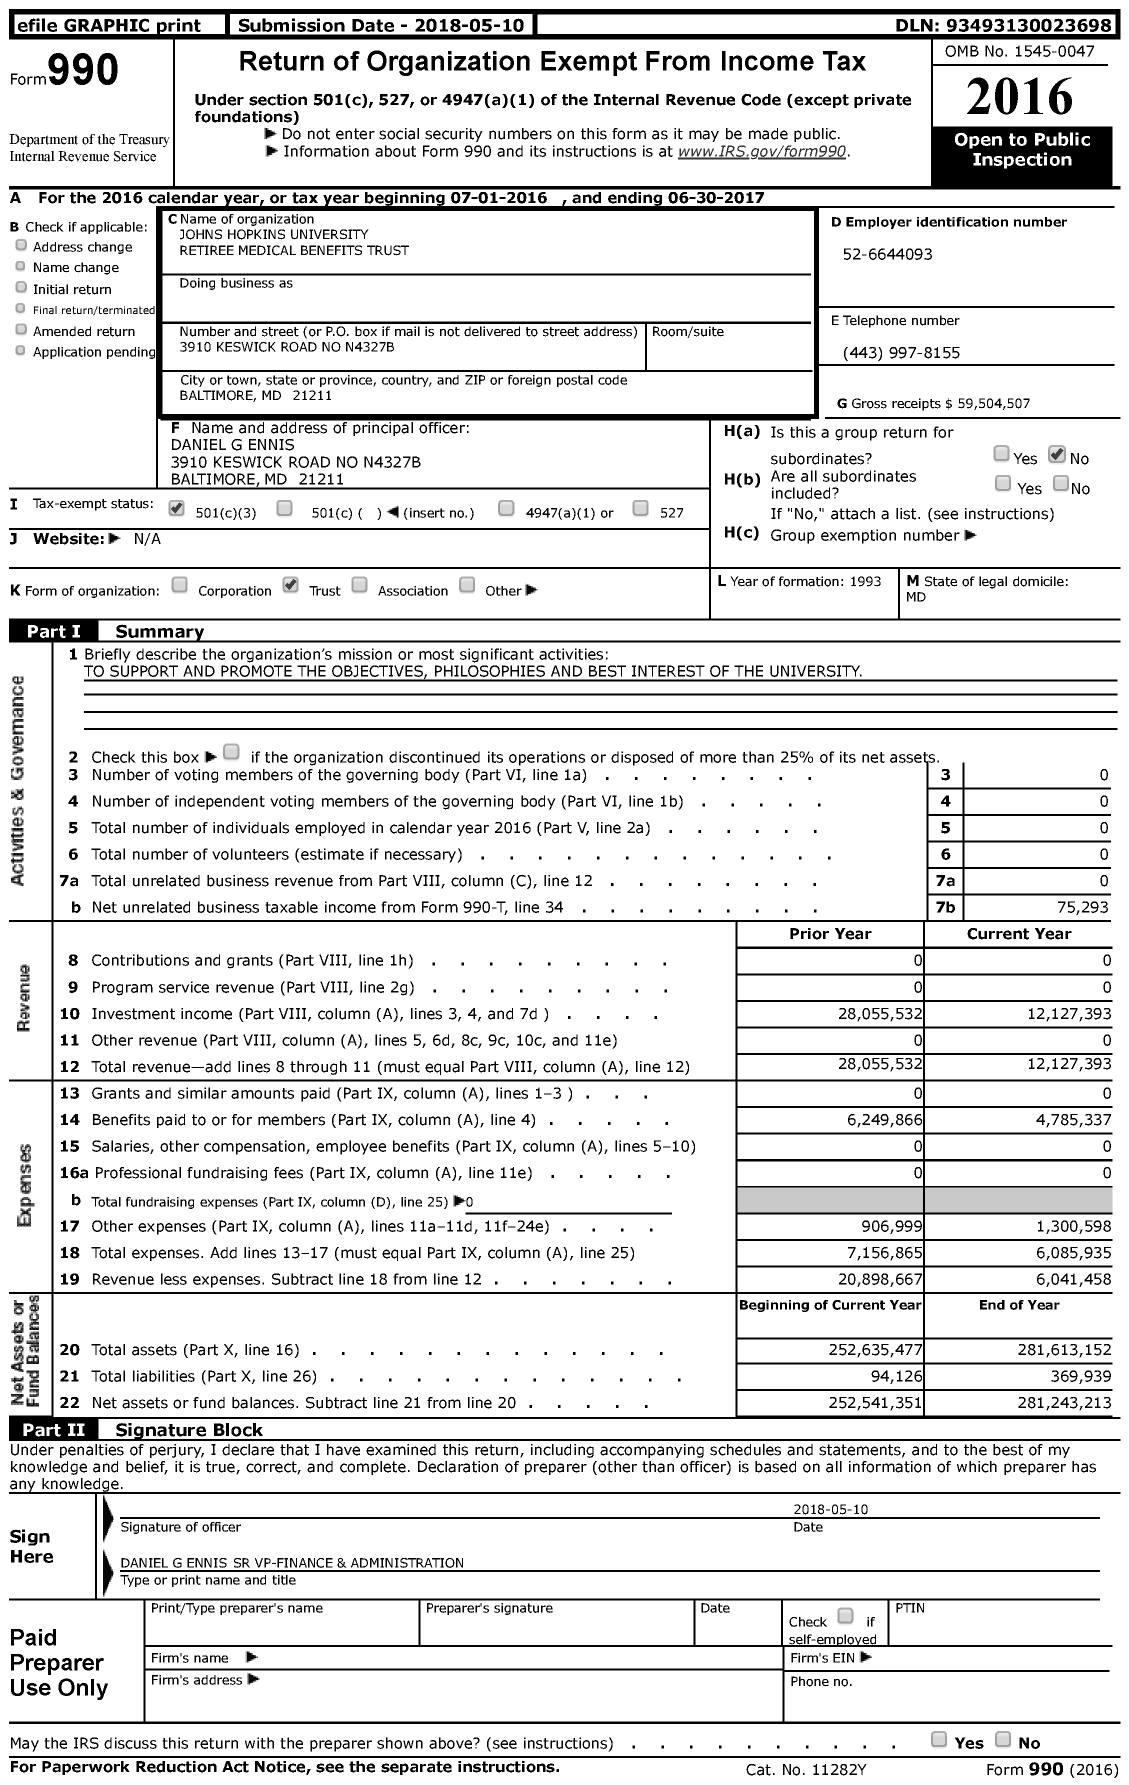 Image of first page of 2016 Form 990 for Johns Hopkins University Retiree Medical Benefits Trust